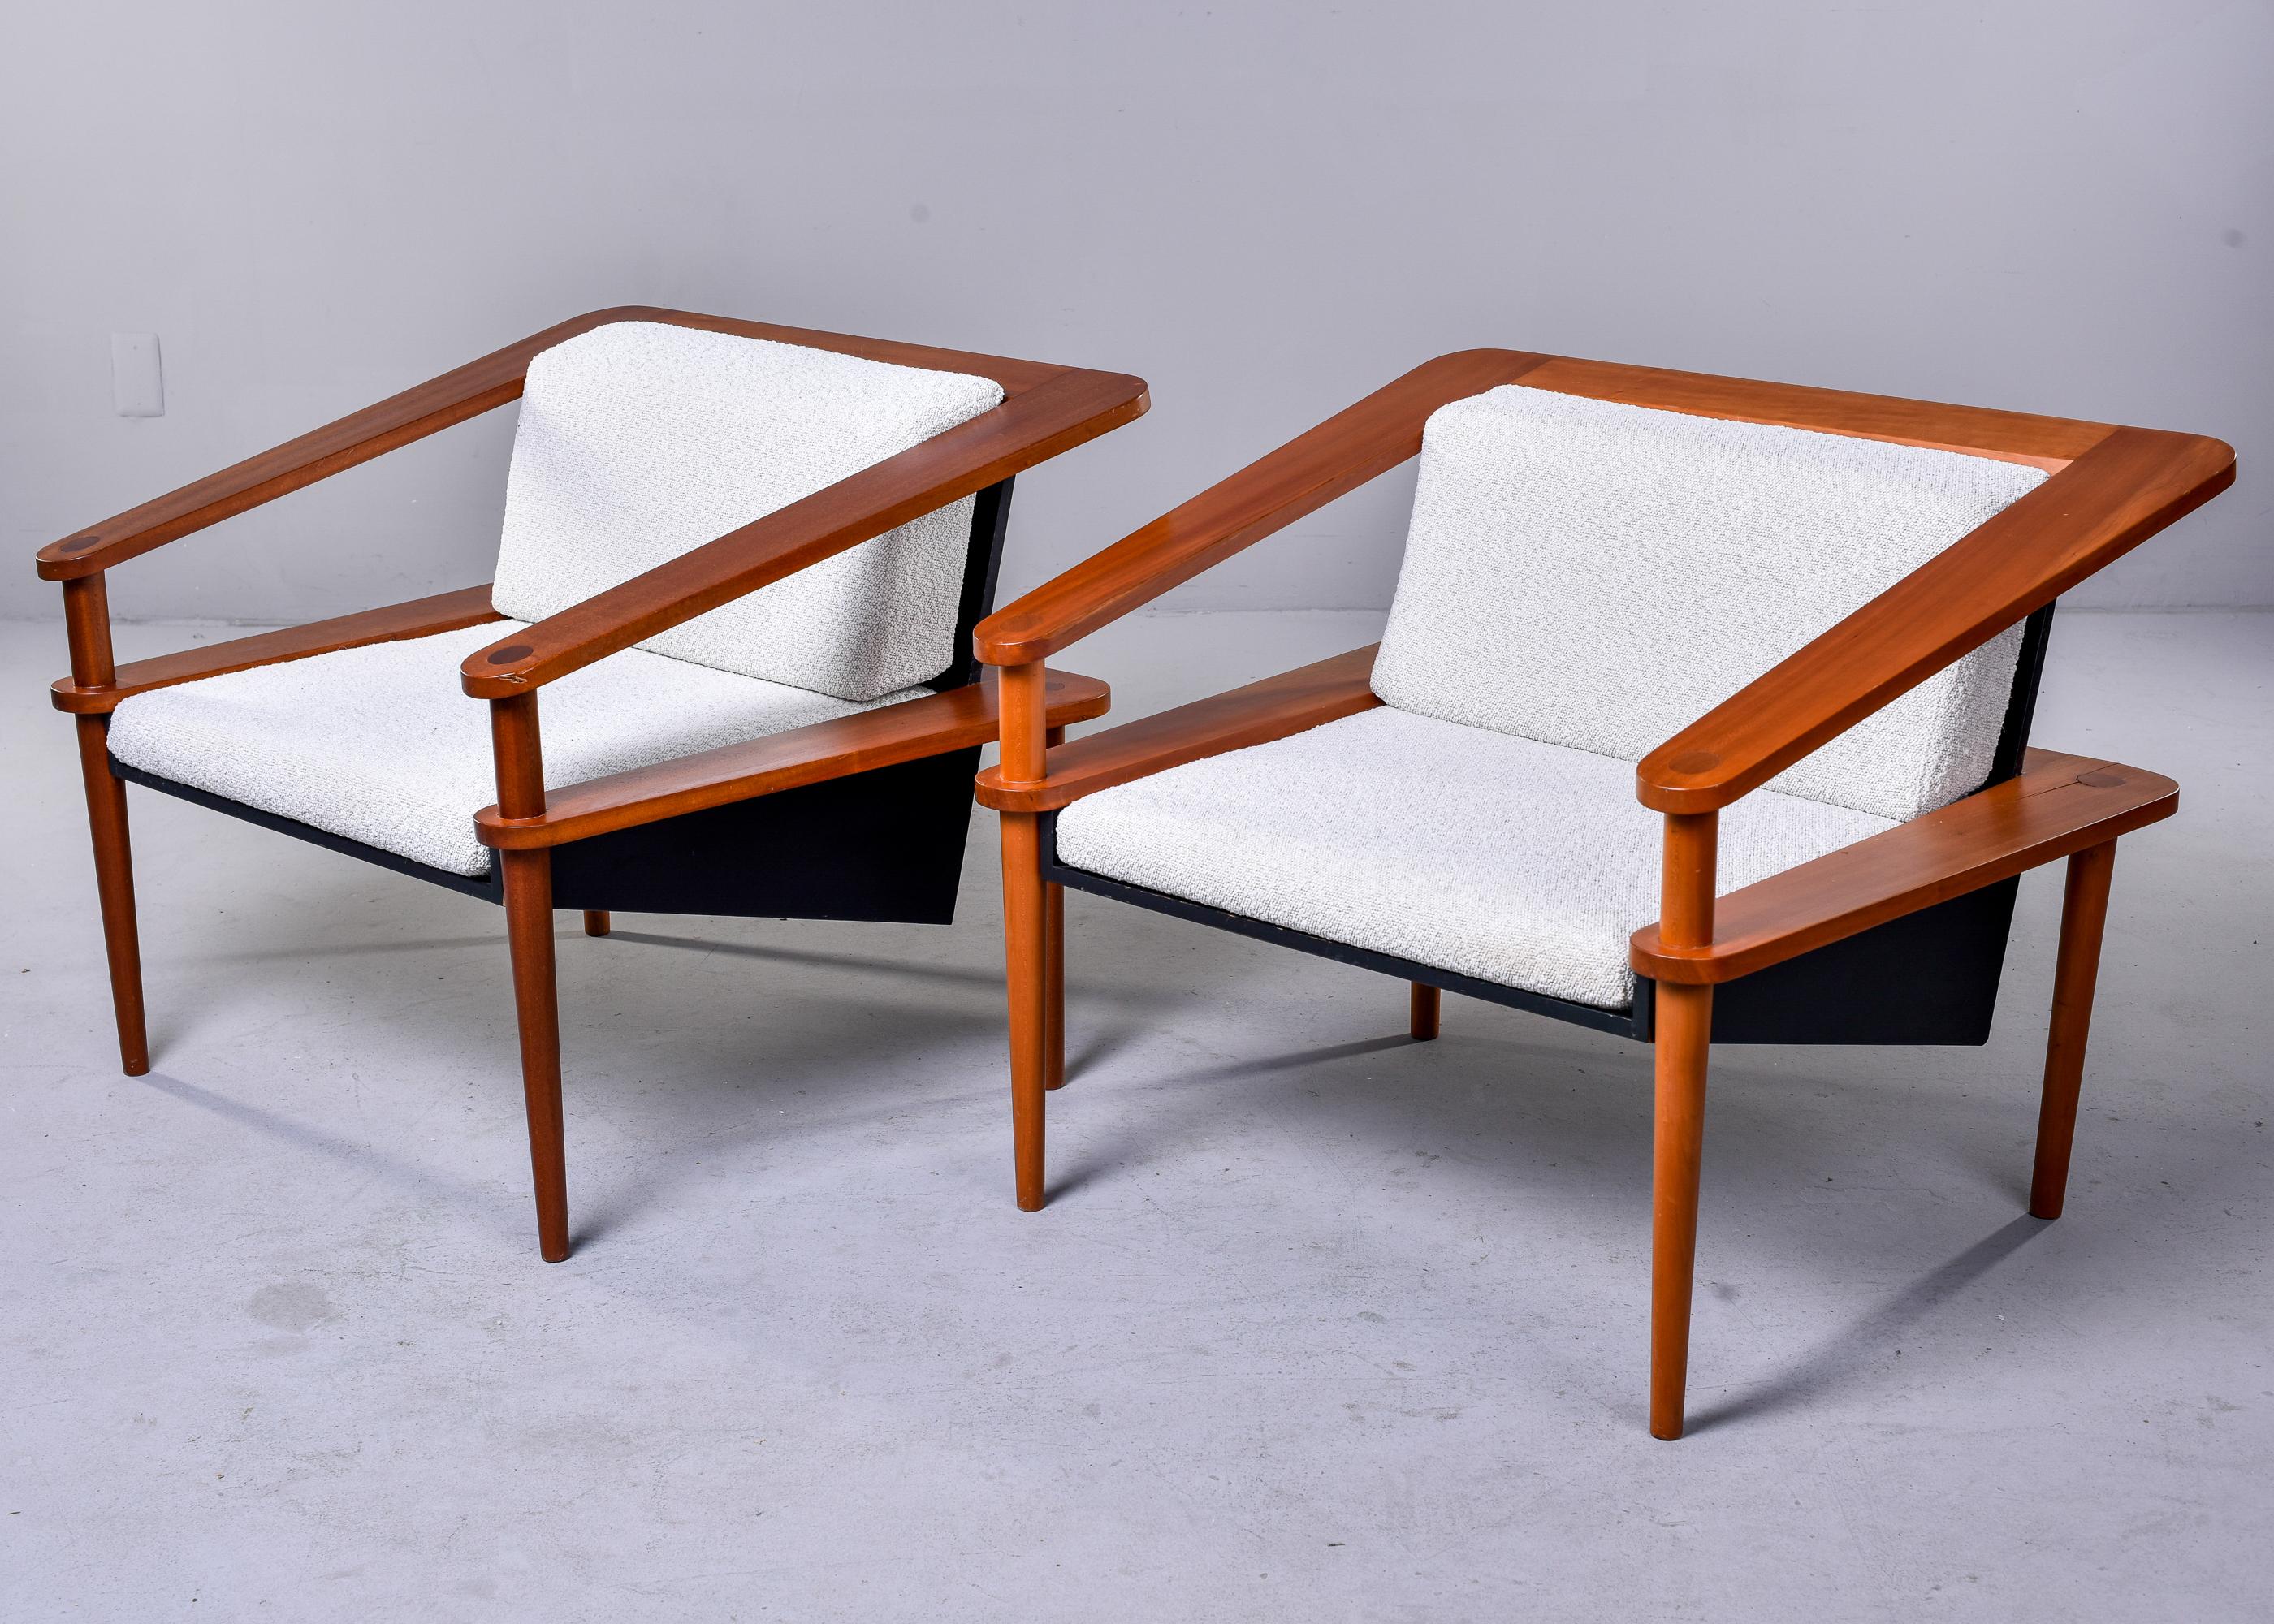 Pair Unusual Mid Century Sculptural Cube Chairs with Teak Frames In Good Condition For Sale In Troy, MI